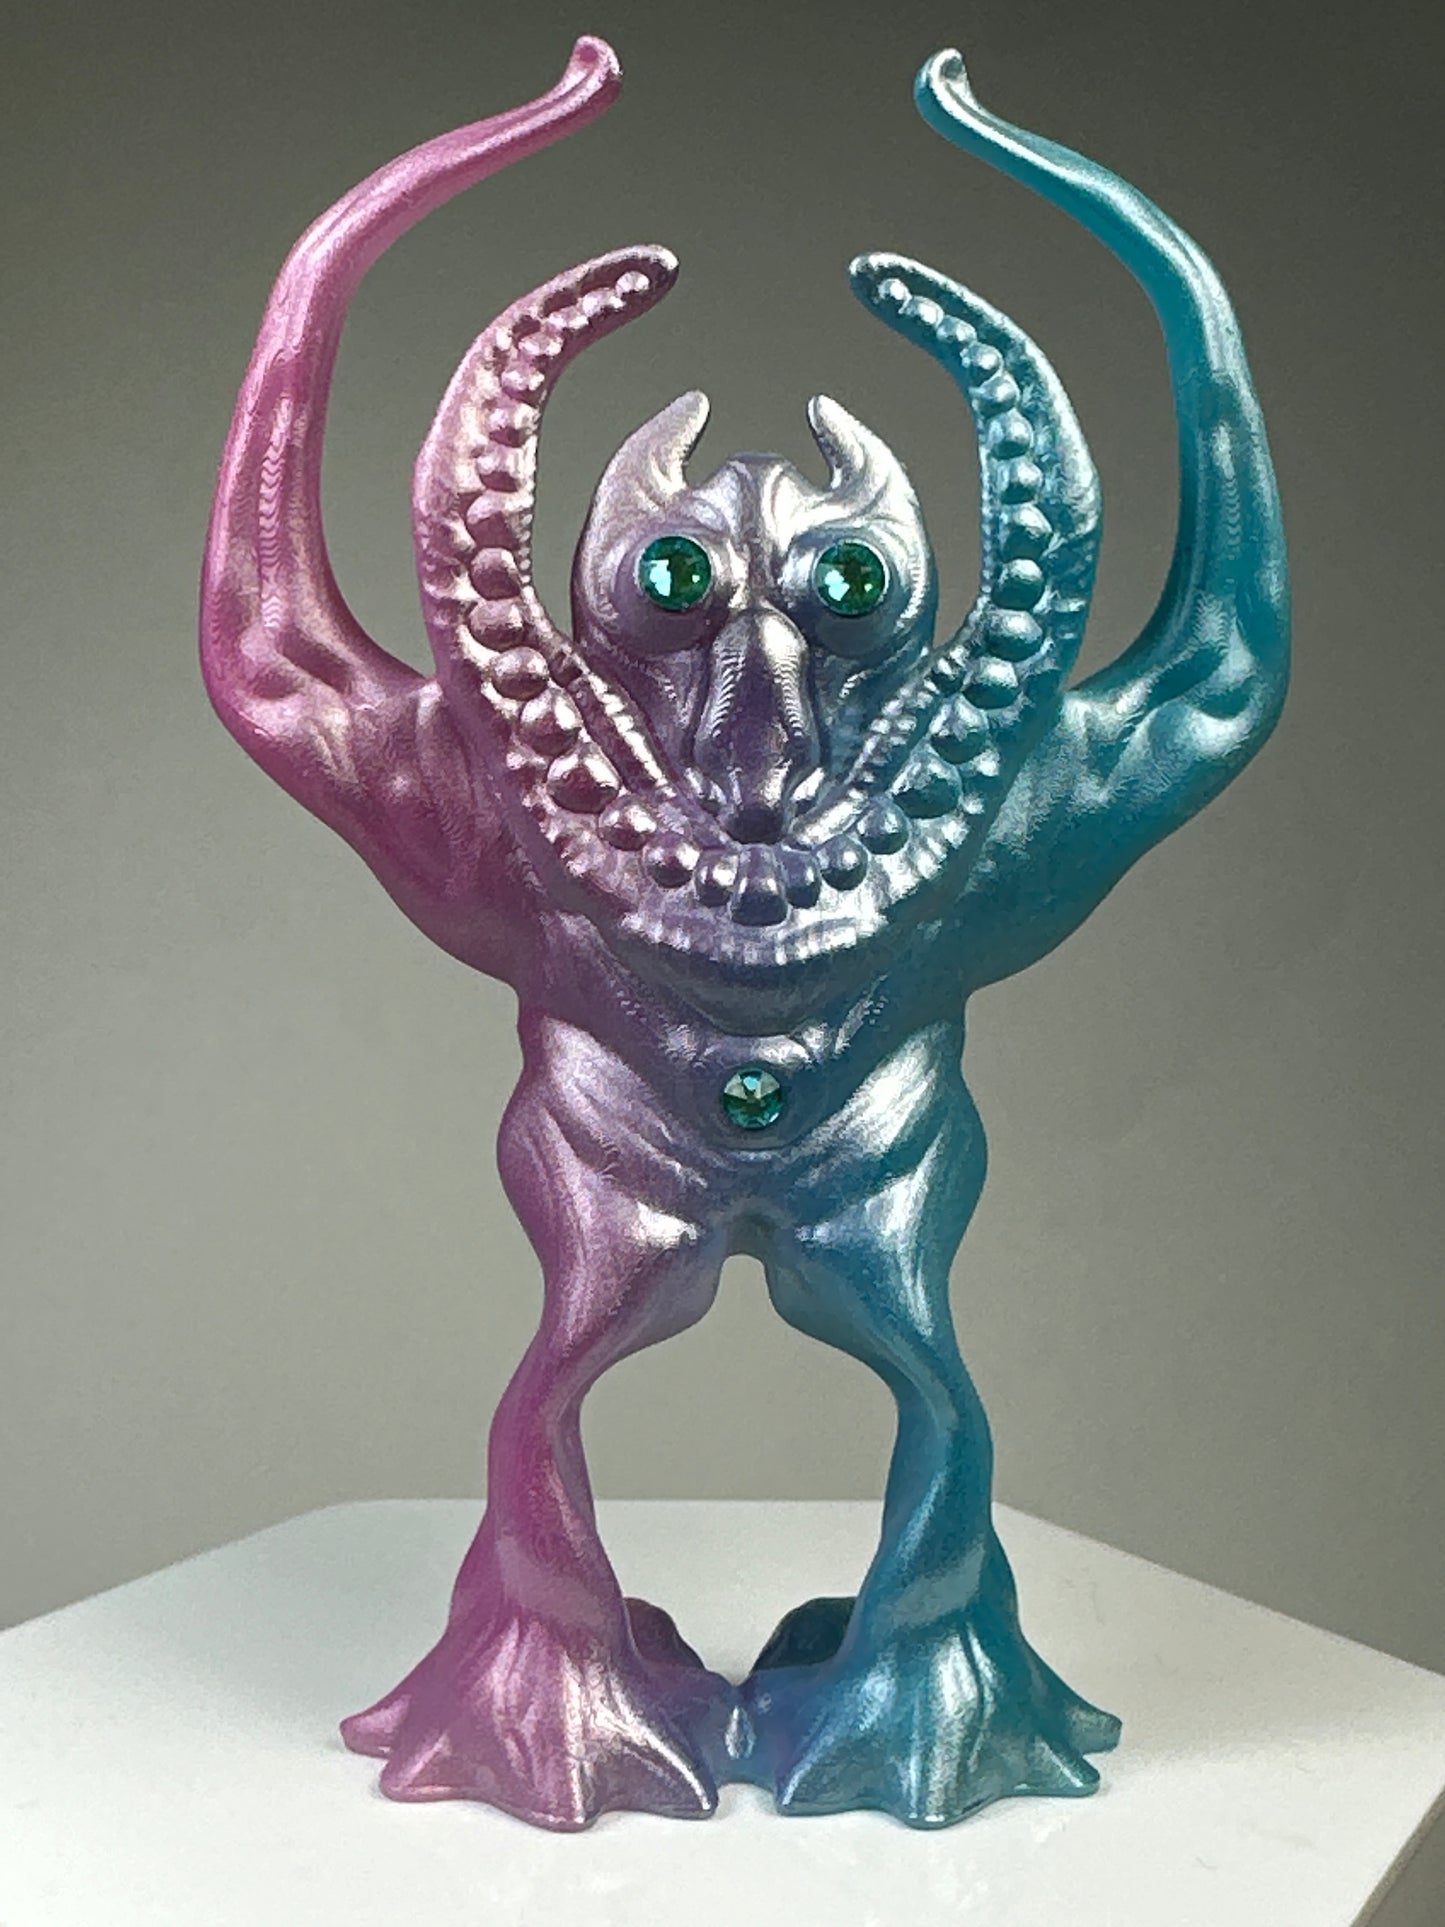 Sammy Smiles: Pink and Blue Contortions